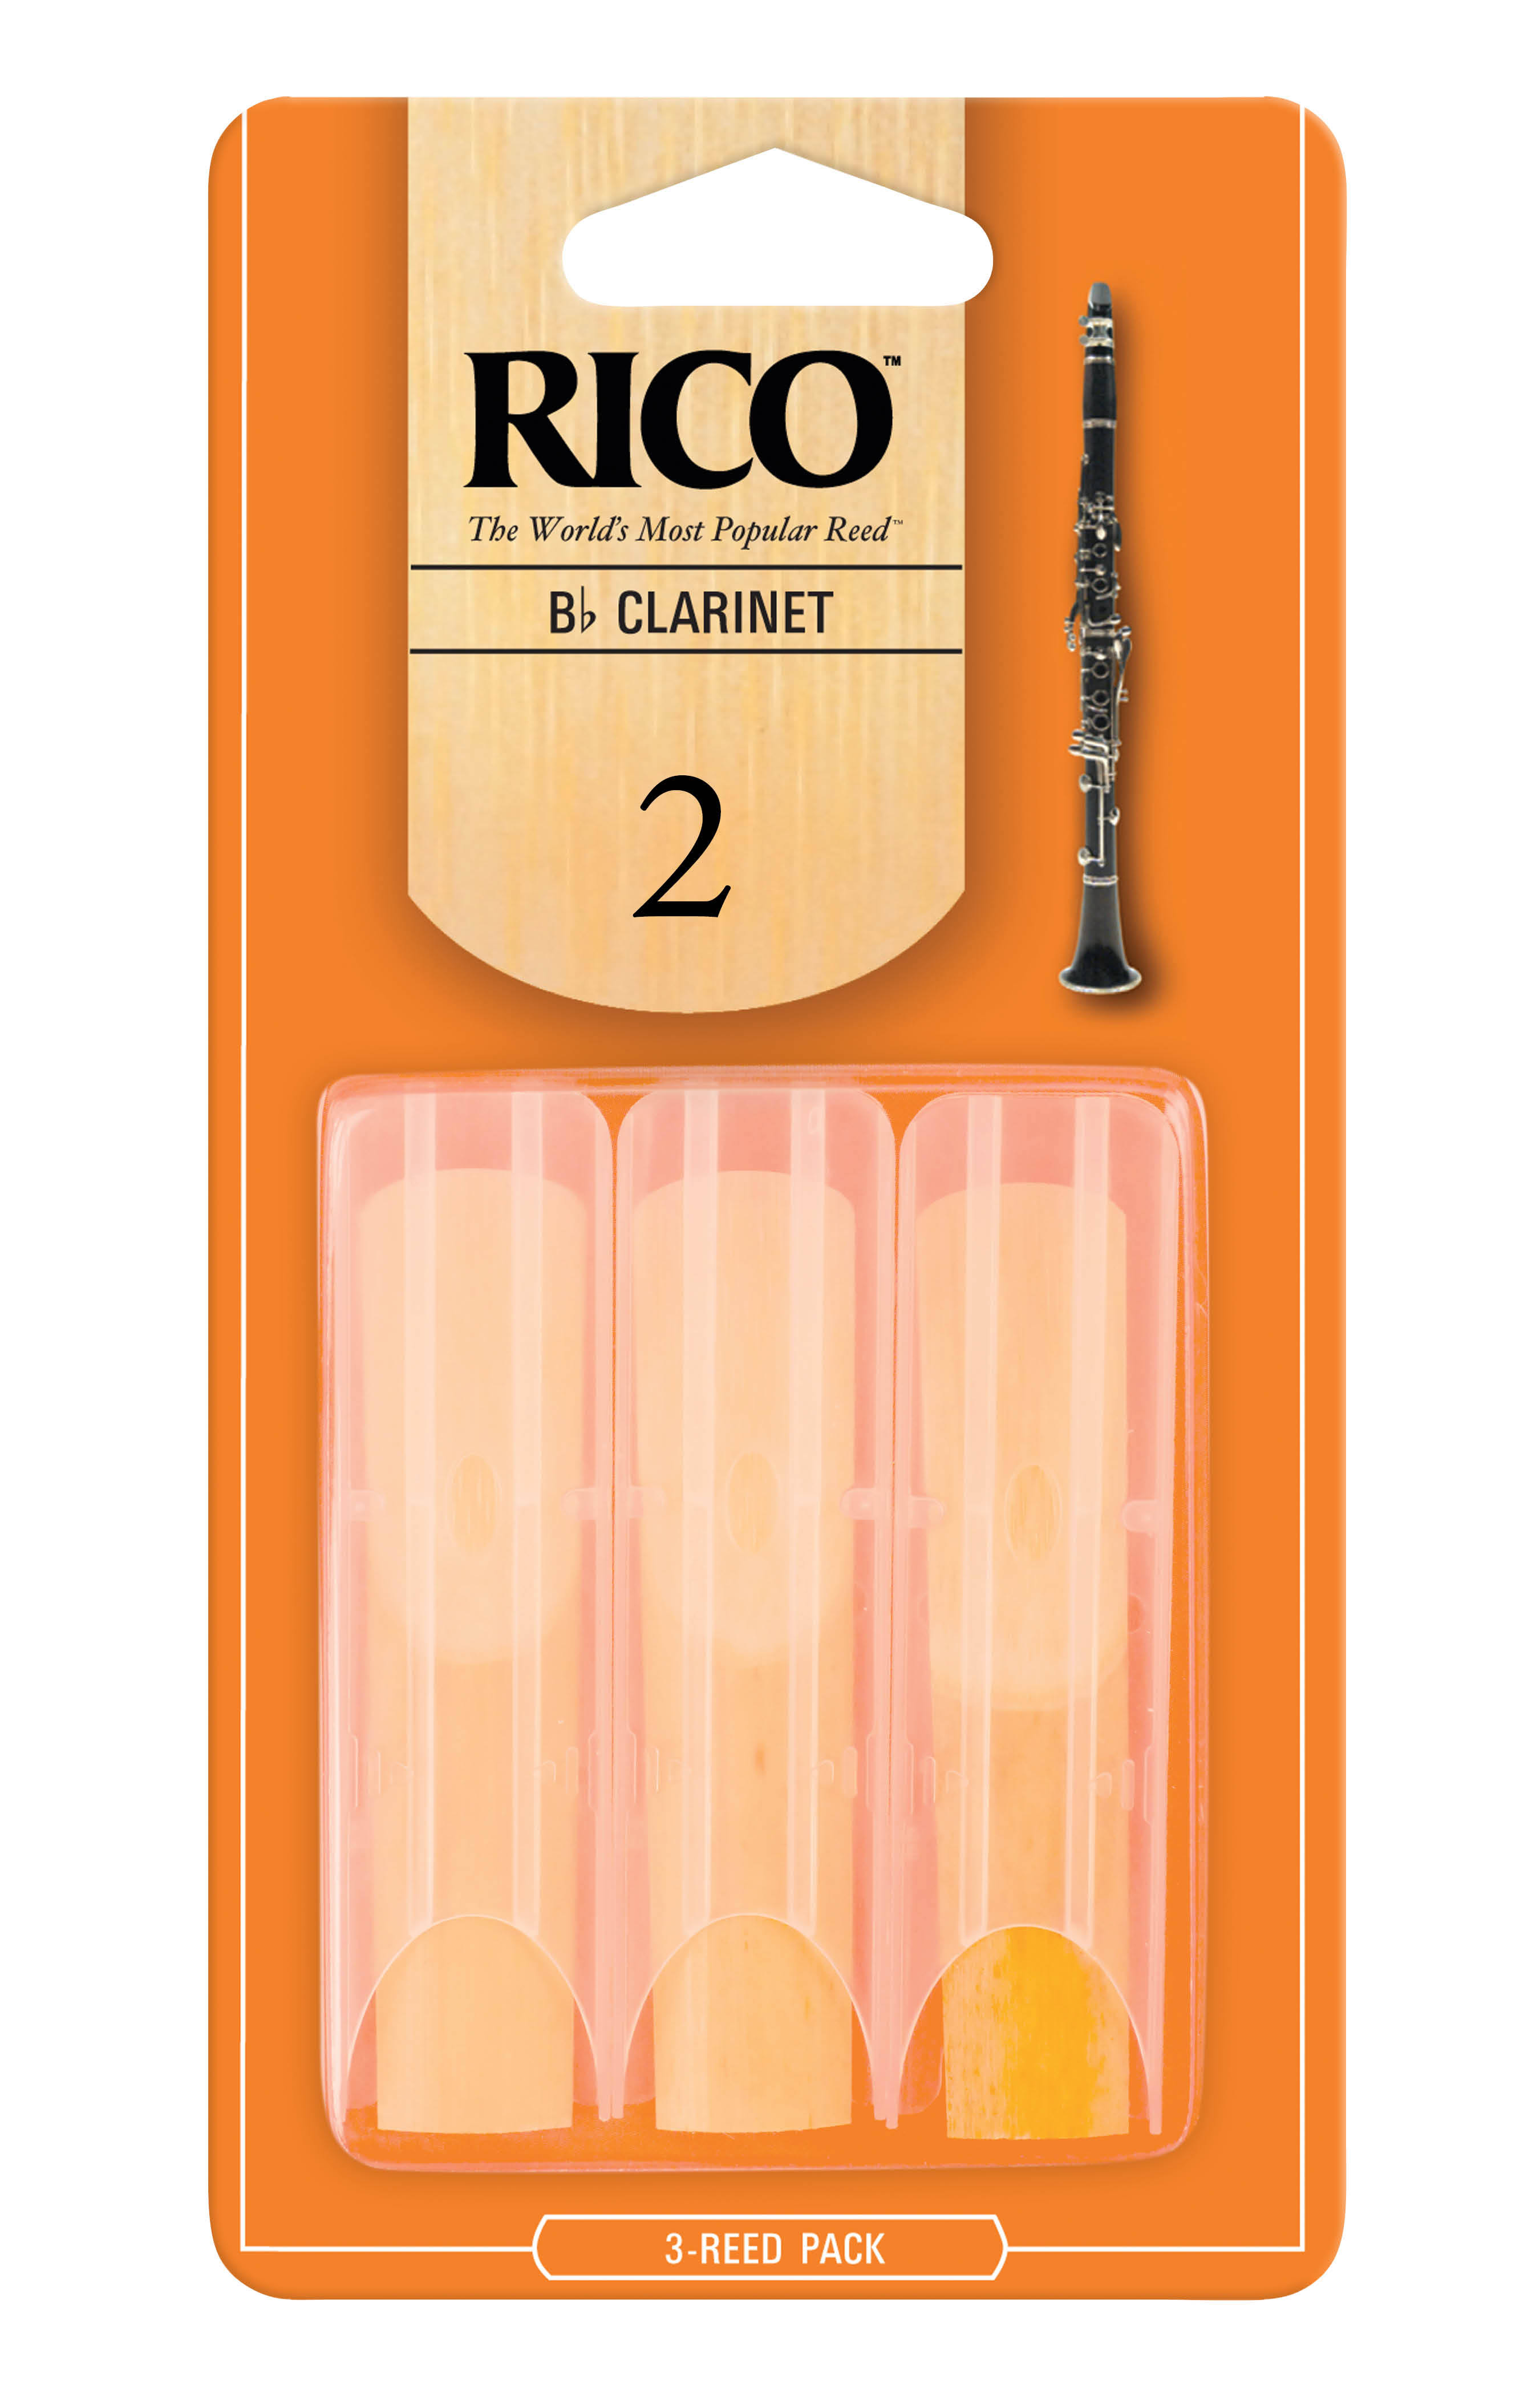 D'addario Rico Clarinet Reeds - 3-Reed Pack